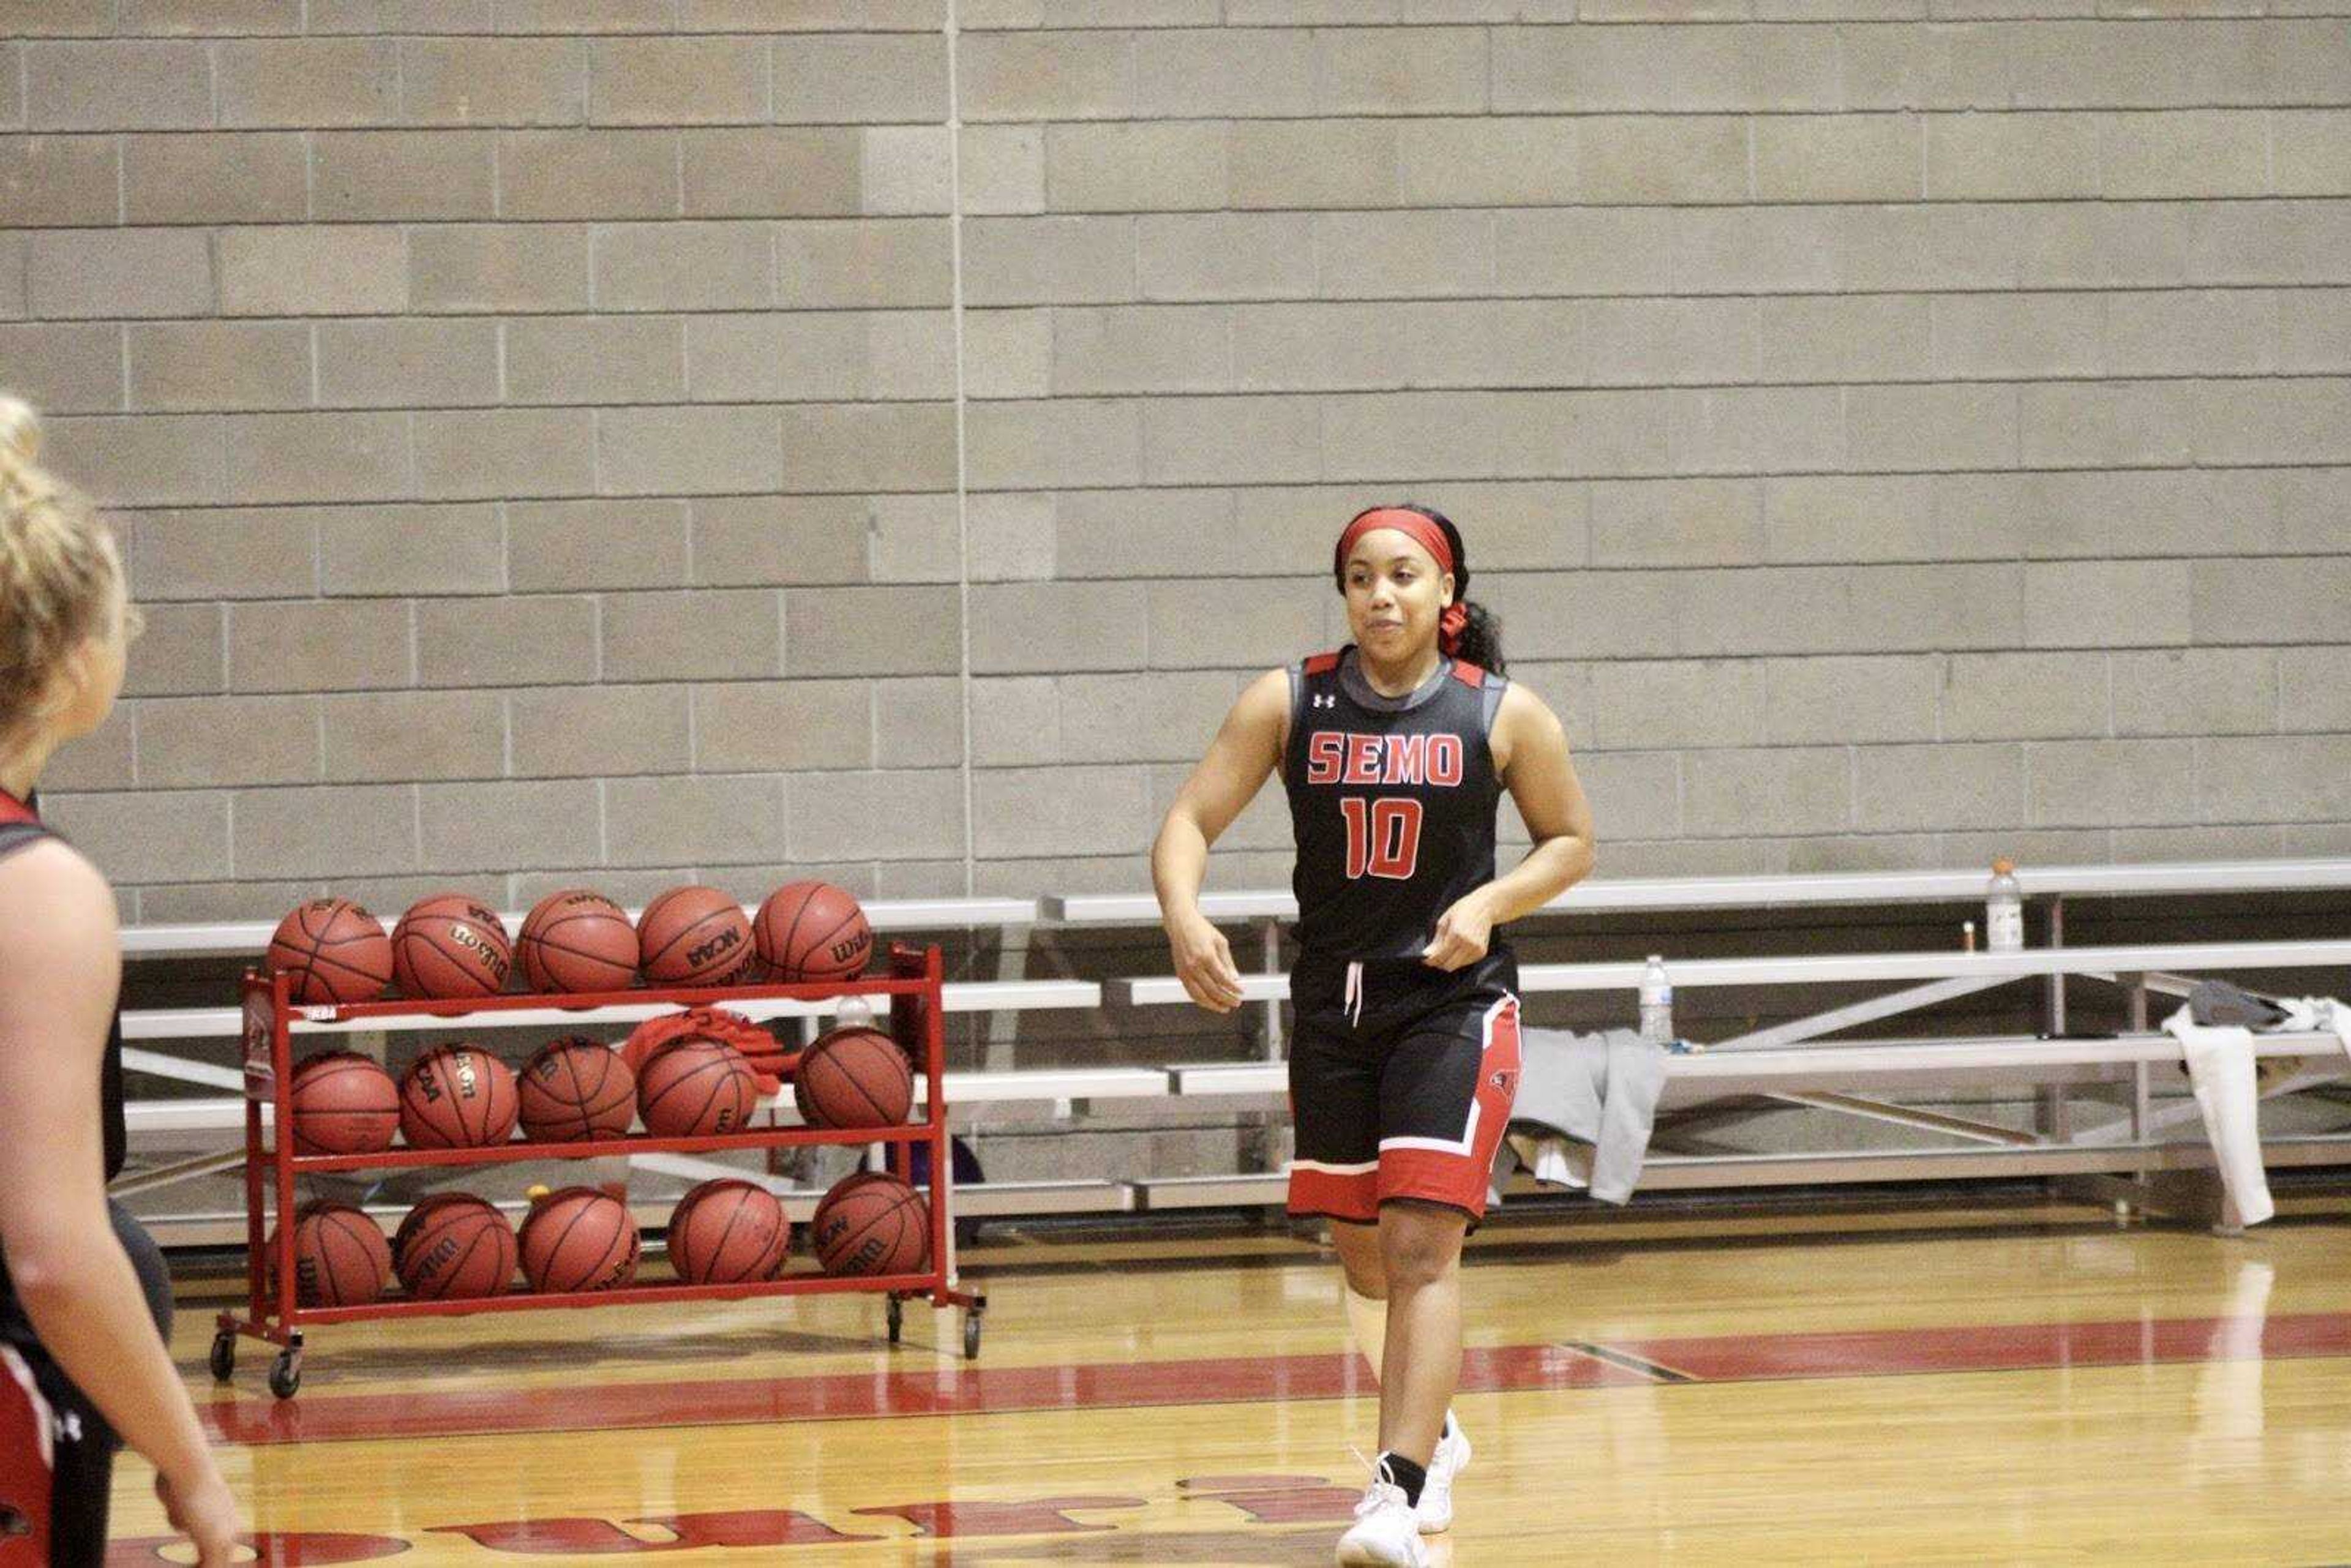 Sophomore guard Taelour Pruitt runs onto the court during a scrimmage at the Southeast Recreation Center on Oct. 18.